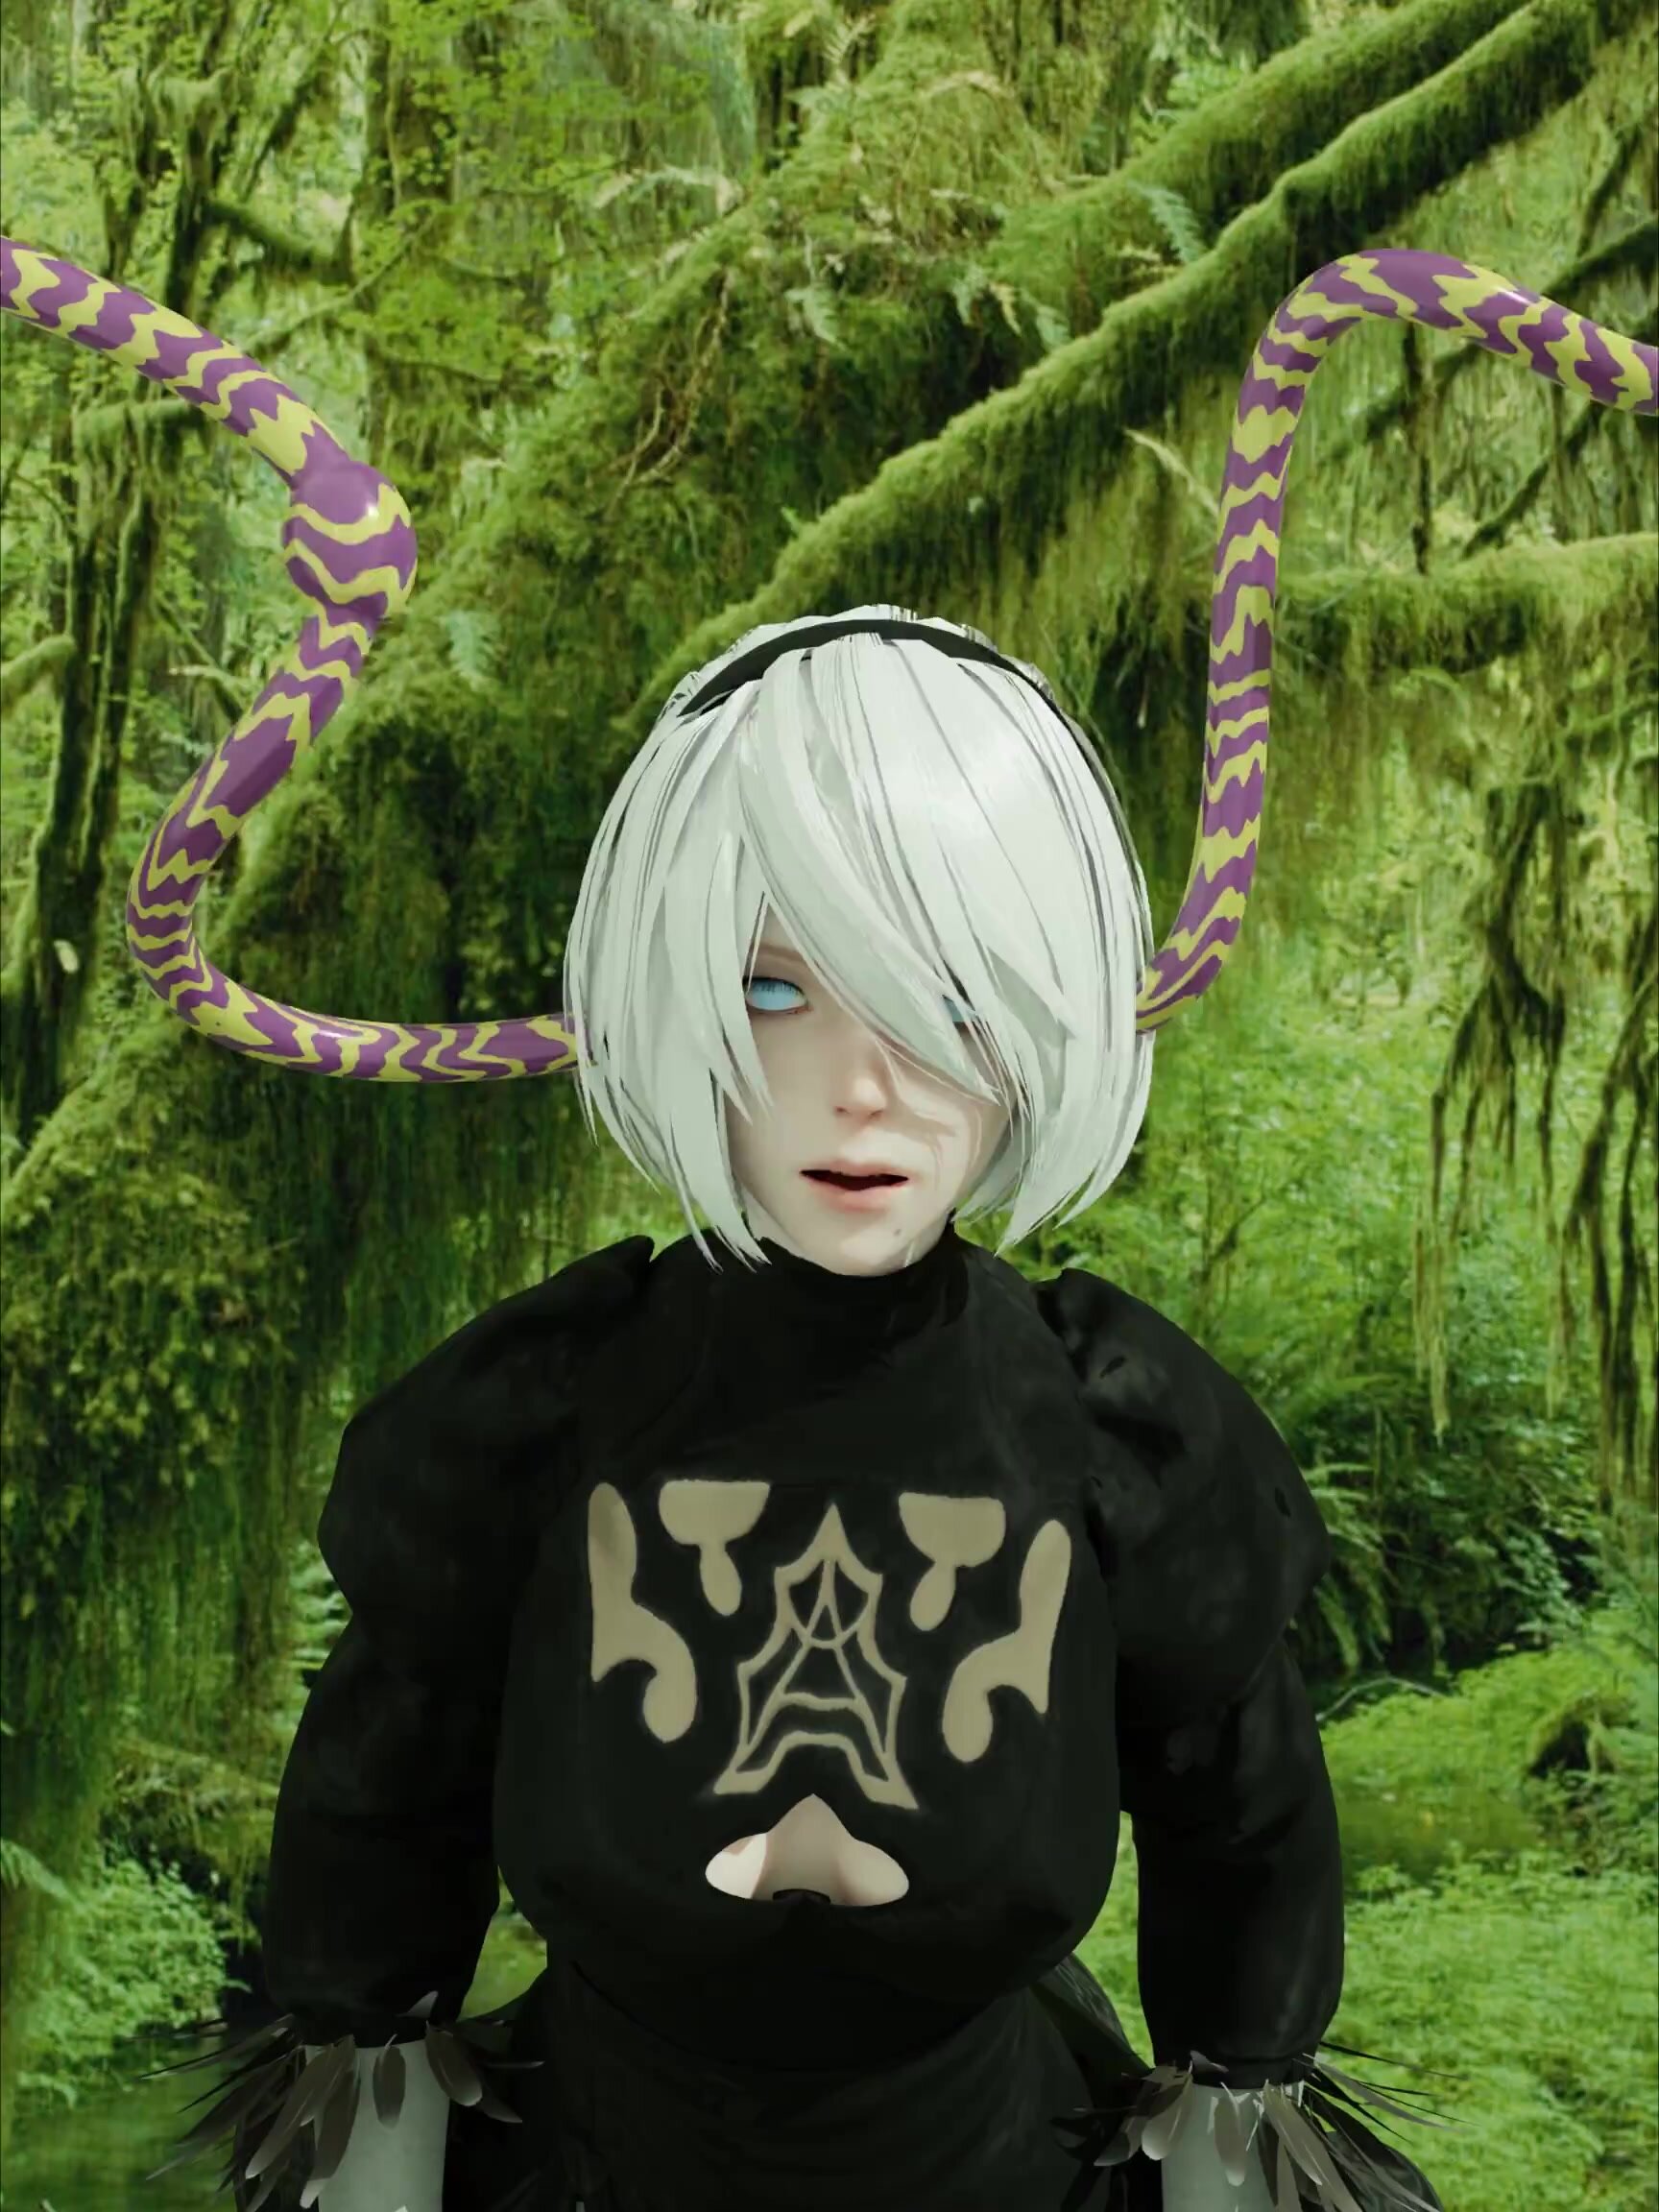 2B getting ear fucked by tentacles